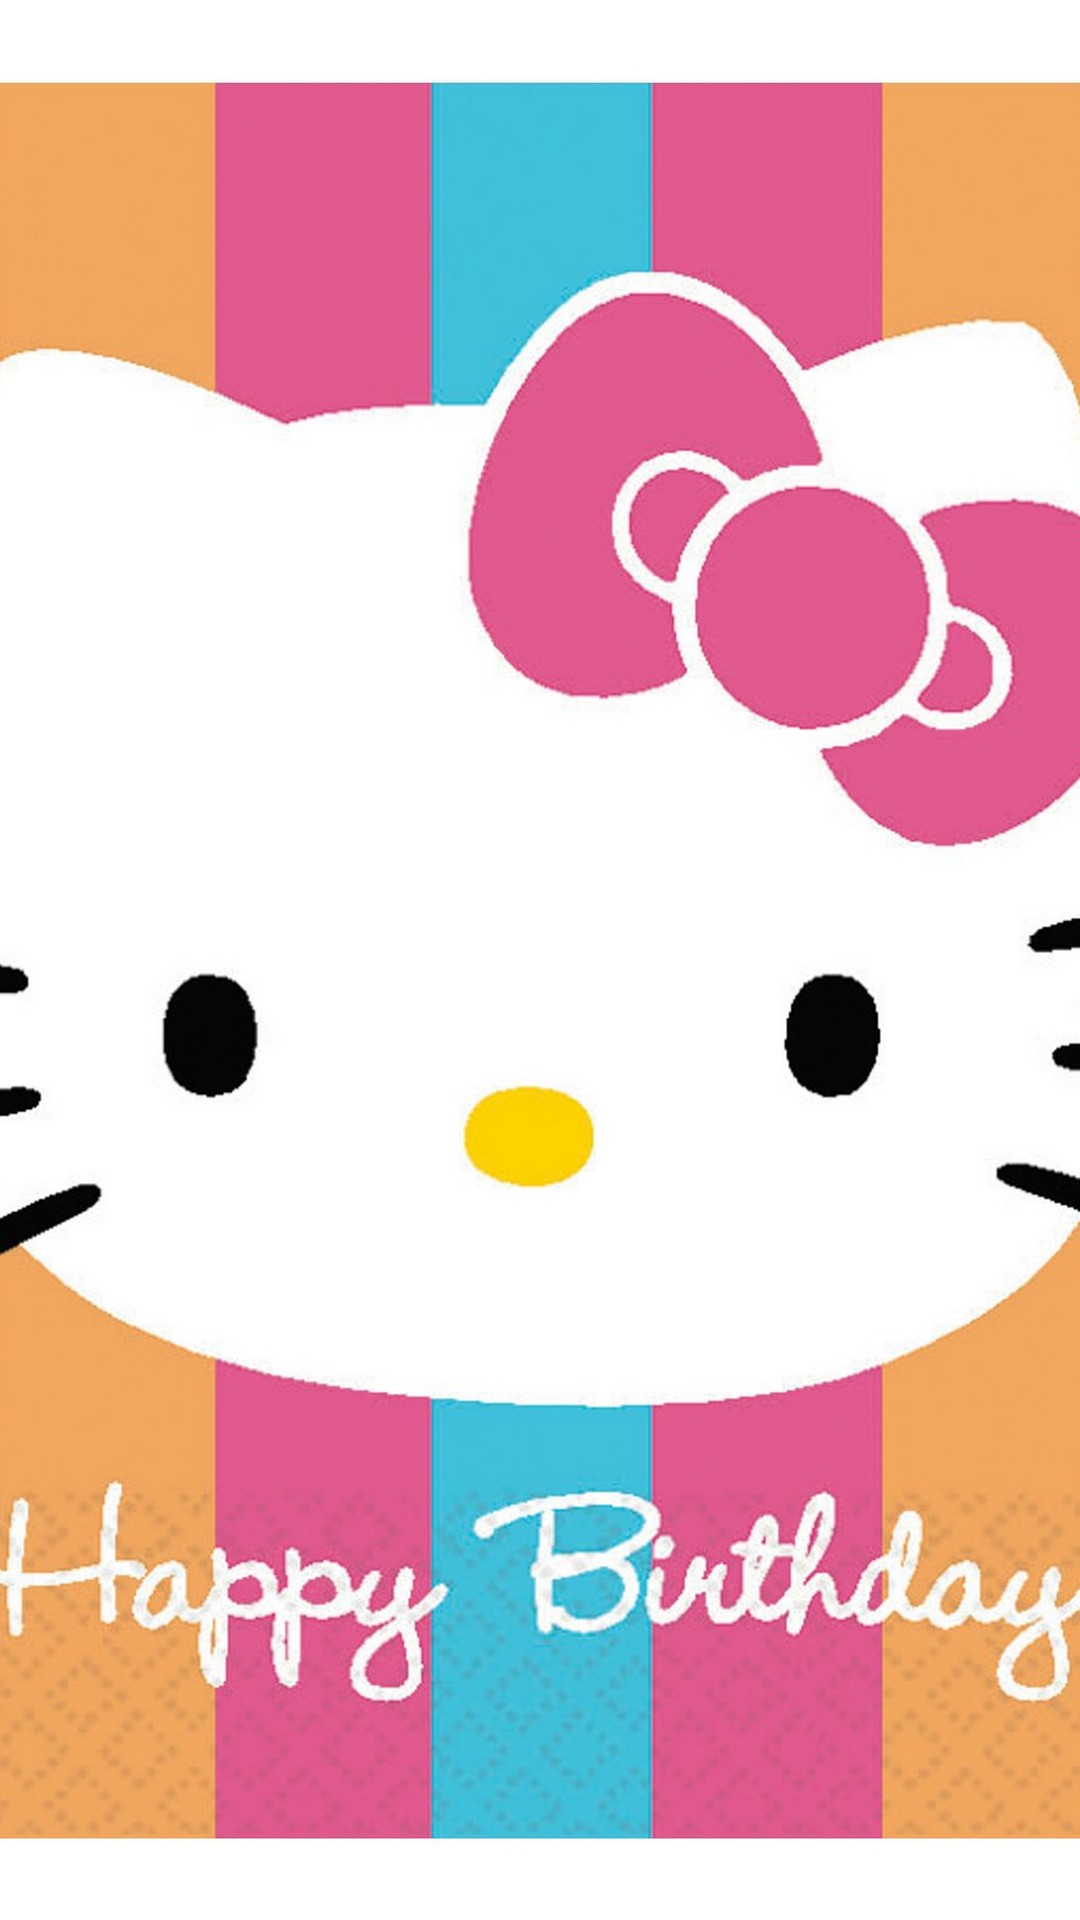 Android Wallpaper HD Sanrio Hello Kitty with resolution 1080X1920 pixel. You can make this wallpaper for your Android backgrounds, Tablet, Smartphones Screensavers and Mobile Phone Lock Screen